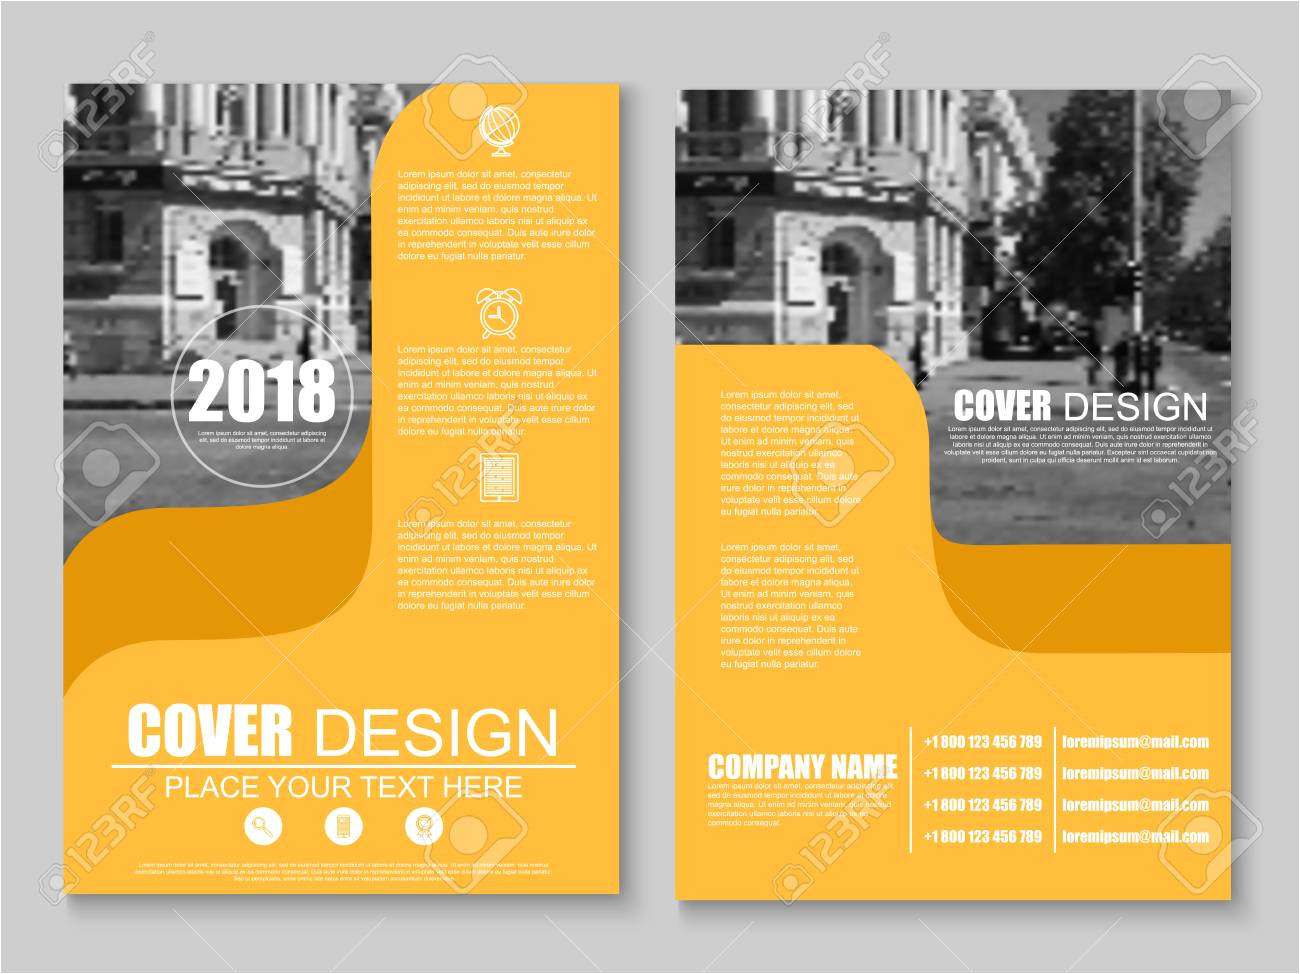 78704958 yellow and black flyer corporate cover annual report vector design leaflet advertising abstract back jpg